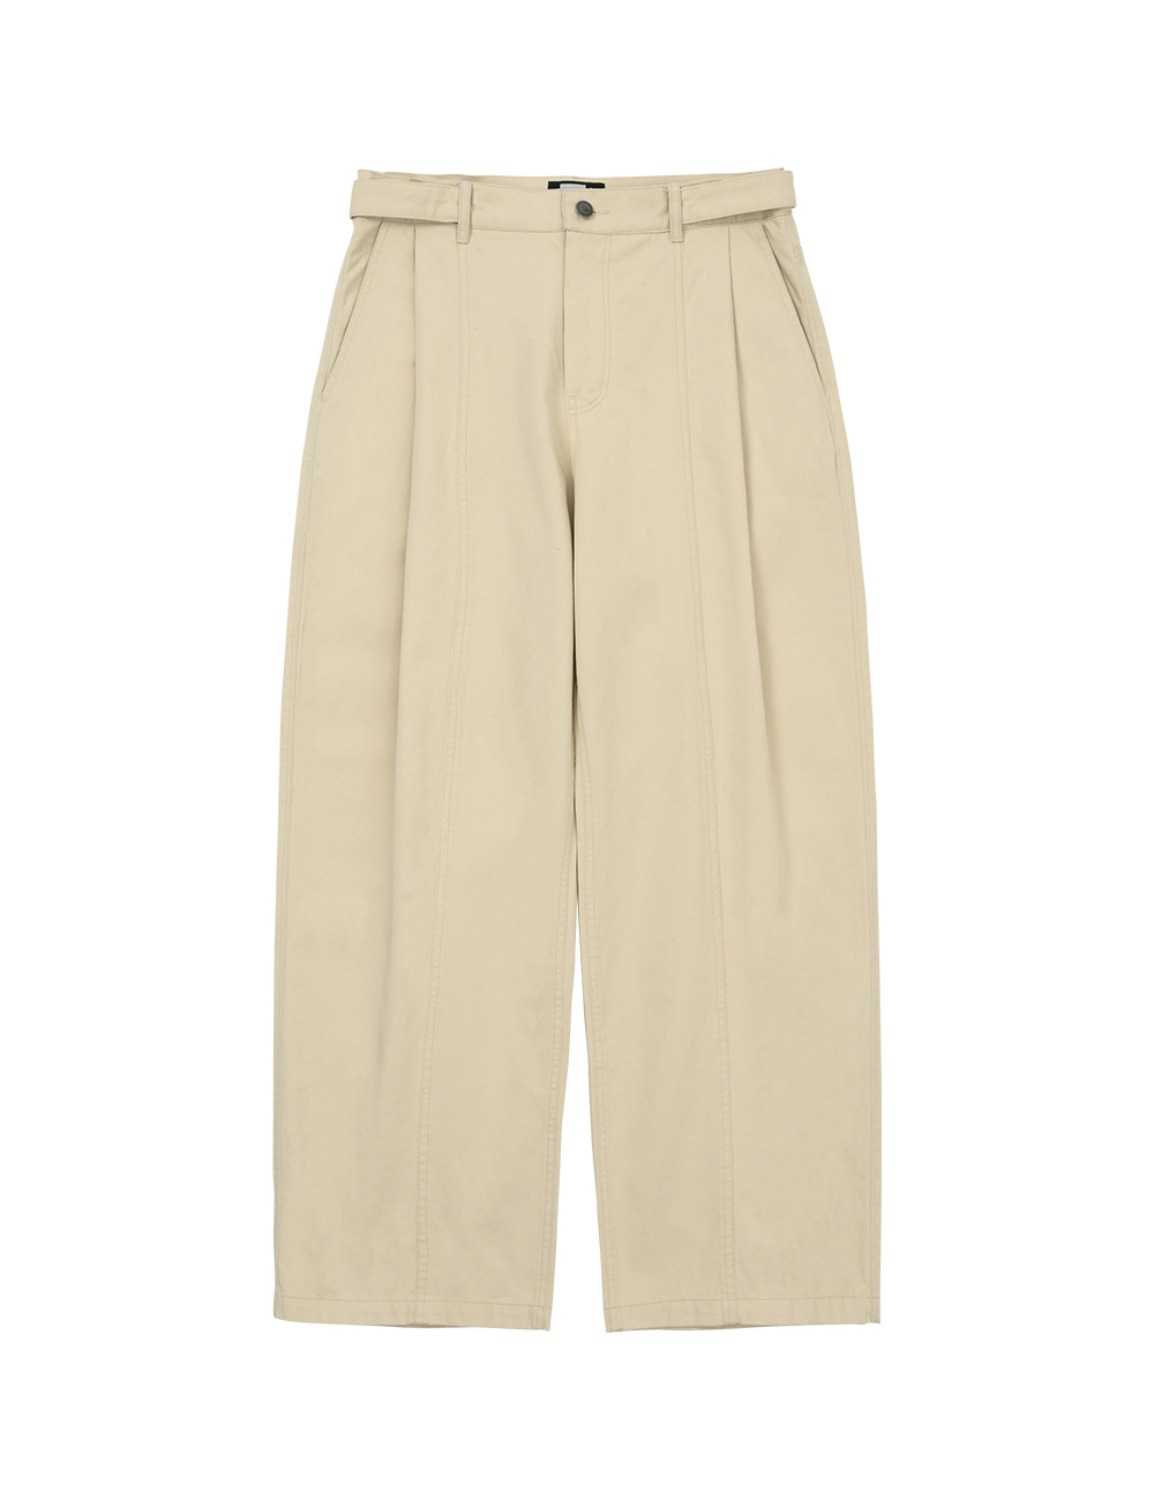 Two Tuck Wide Pants Beige - WELLBEING EXPRESS